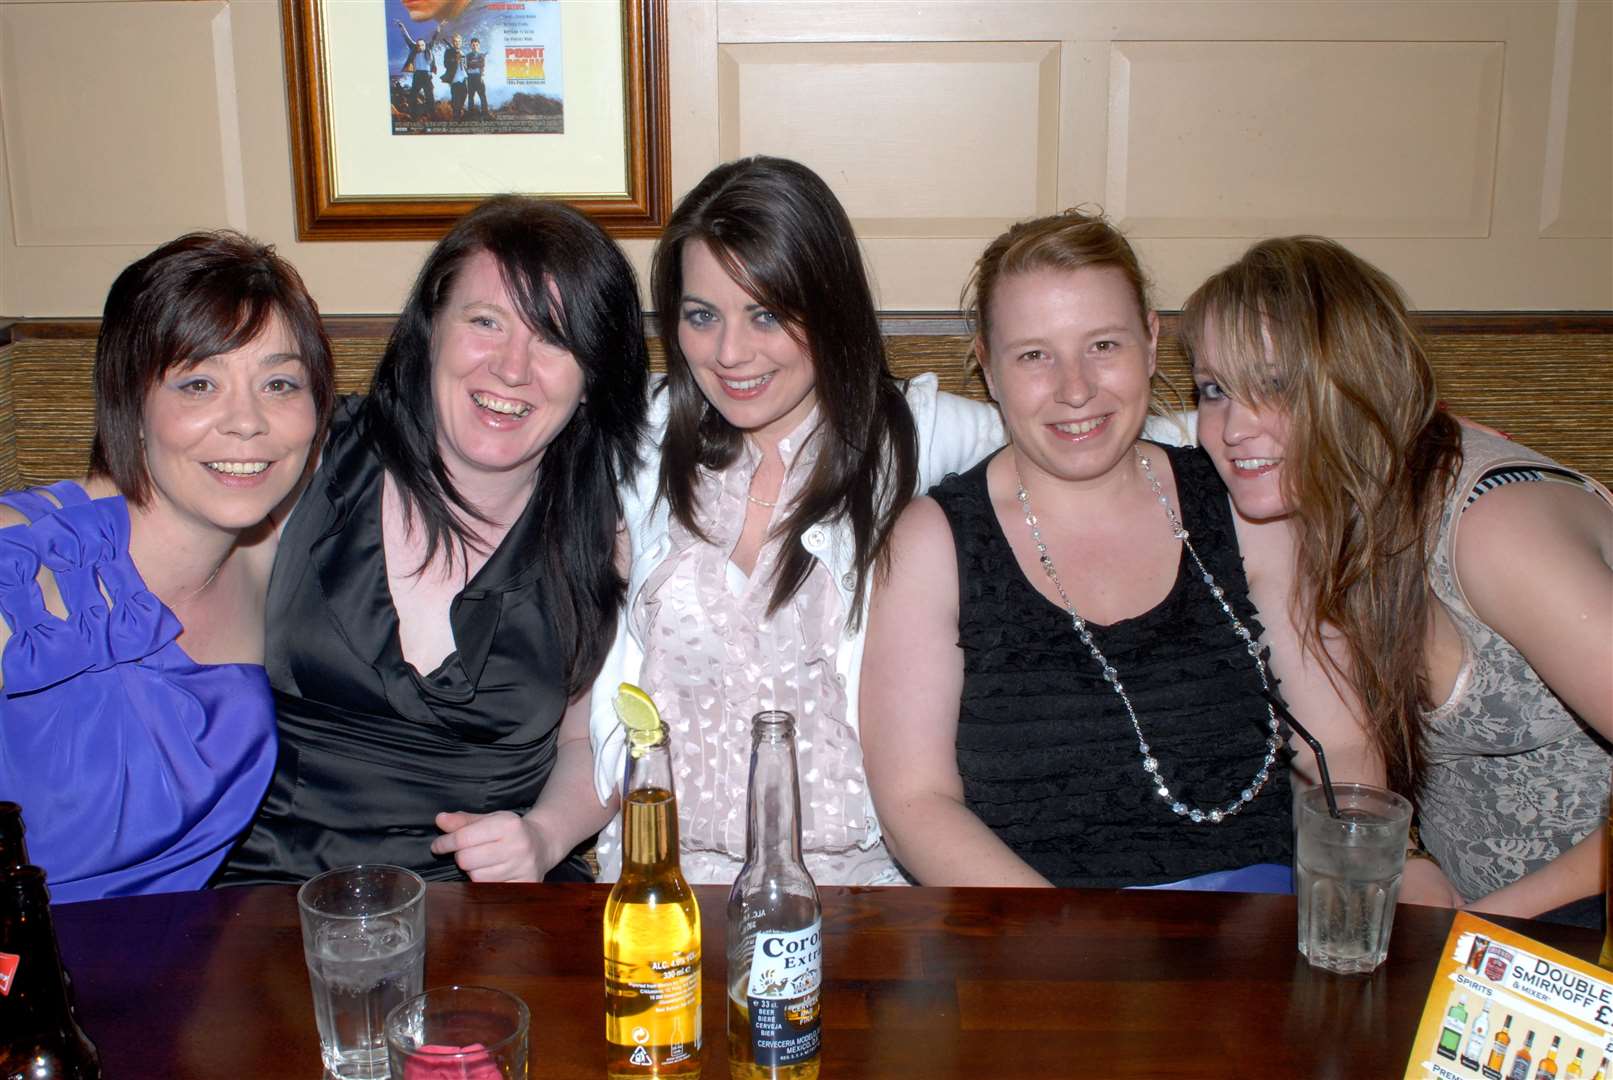 See Copy by: .Cityseen.Staff from the 'Room" have night out at the 'Exchange".(left)Mandy Petrie,Joyce Lawson,Kelly Baird,Victoria McIntosh and Hollie MacKenzie.....Pic by: Gary Anthony.SPP Staff Photographer.New Century House.Longman Road.Inverness.Tel: 01463 233059 *** Local Caption *** Pic by: Gary Anthony.SPP Staff Photographer..